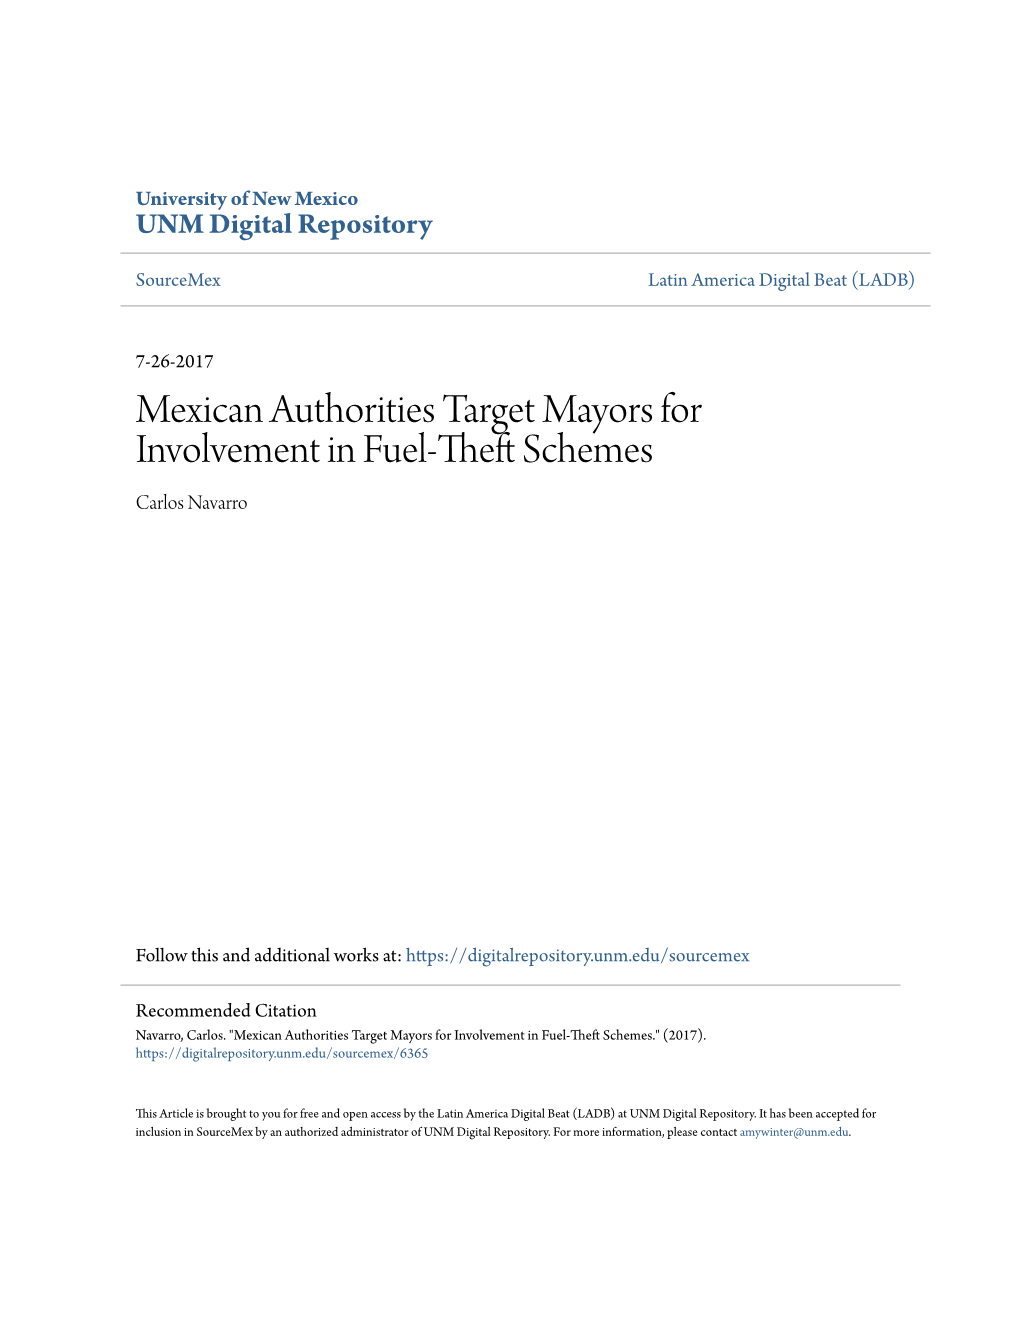 Mexican Authorities Target Mayors for Involvement in Fuel-Theft Schemes by Carlos Navarro Category/Department: Mexico Published: 2017-07-26